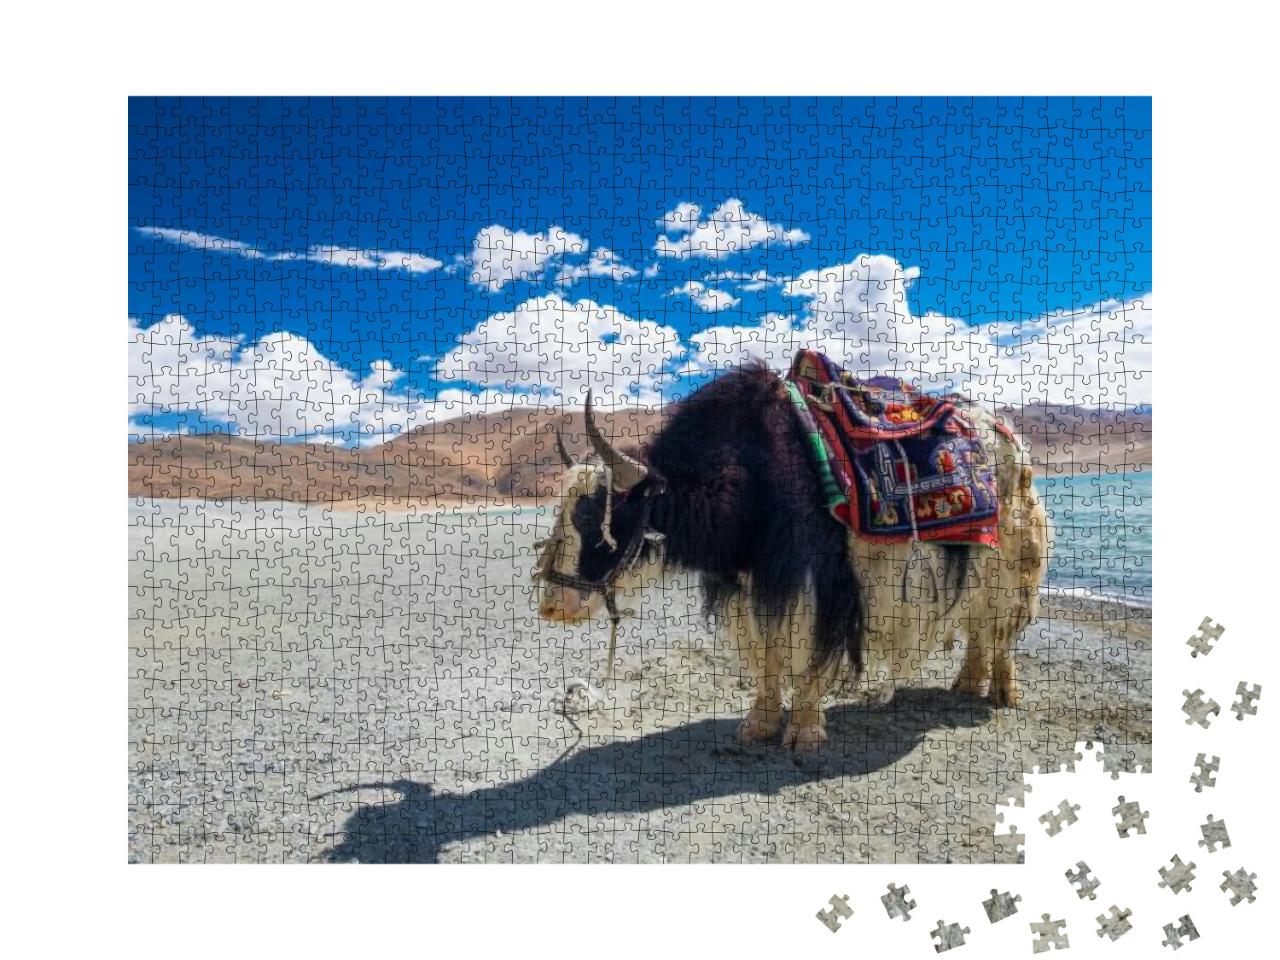 Puzzle 1000 Teile „Yak am Pangong See in Ladakh, Indien“